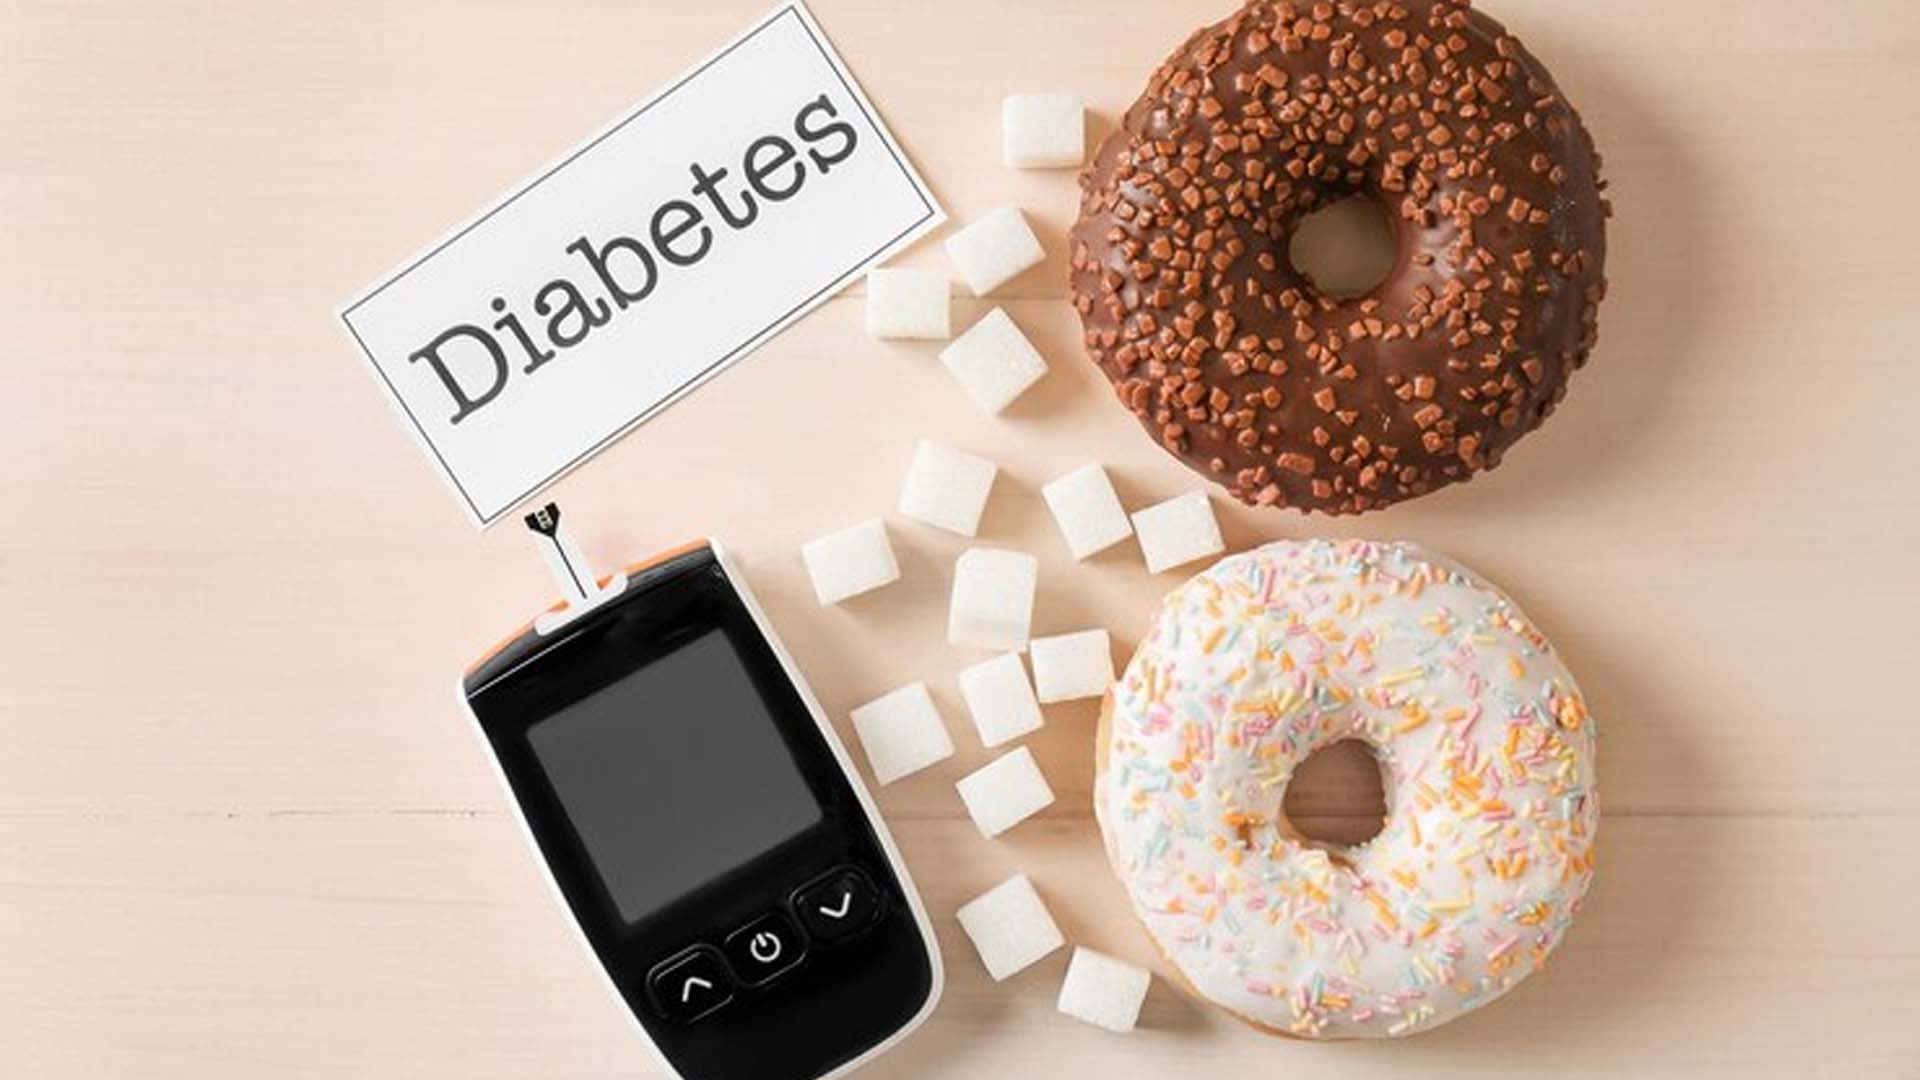 Donuts and Diabetes written